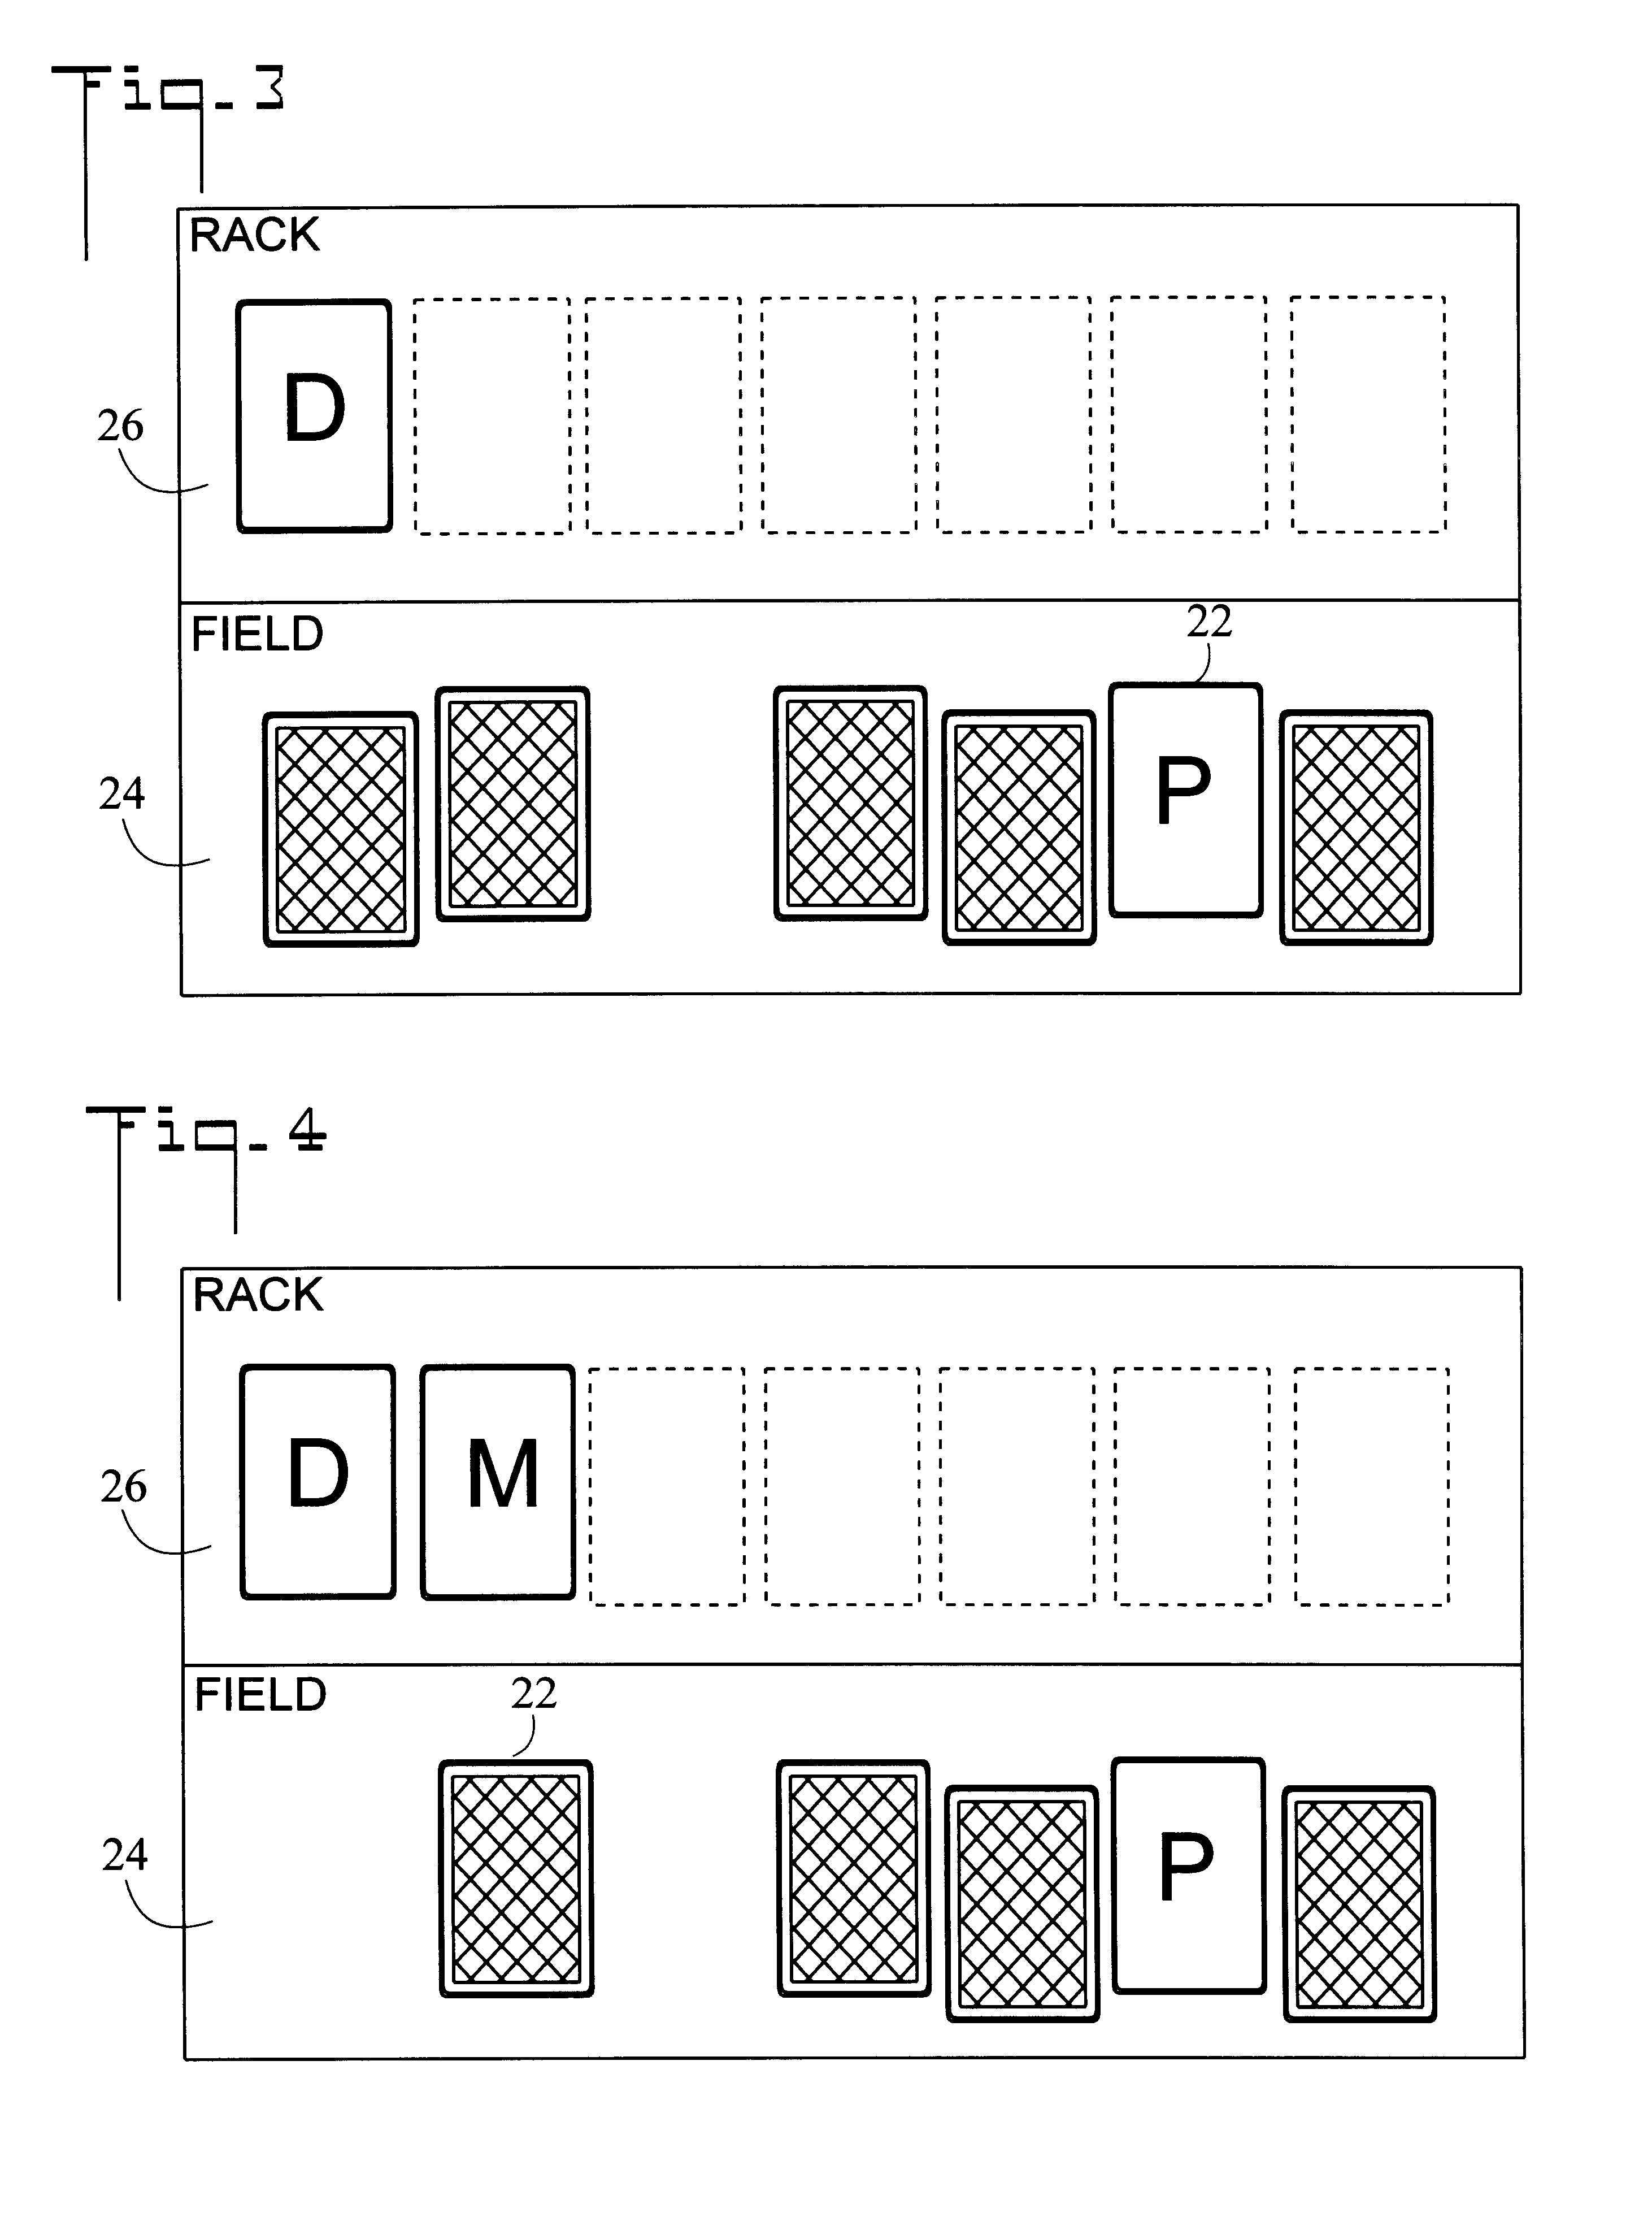 Method of playing an object selection game